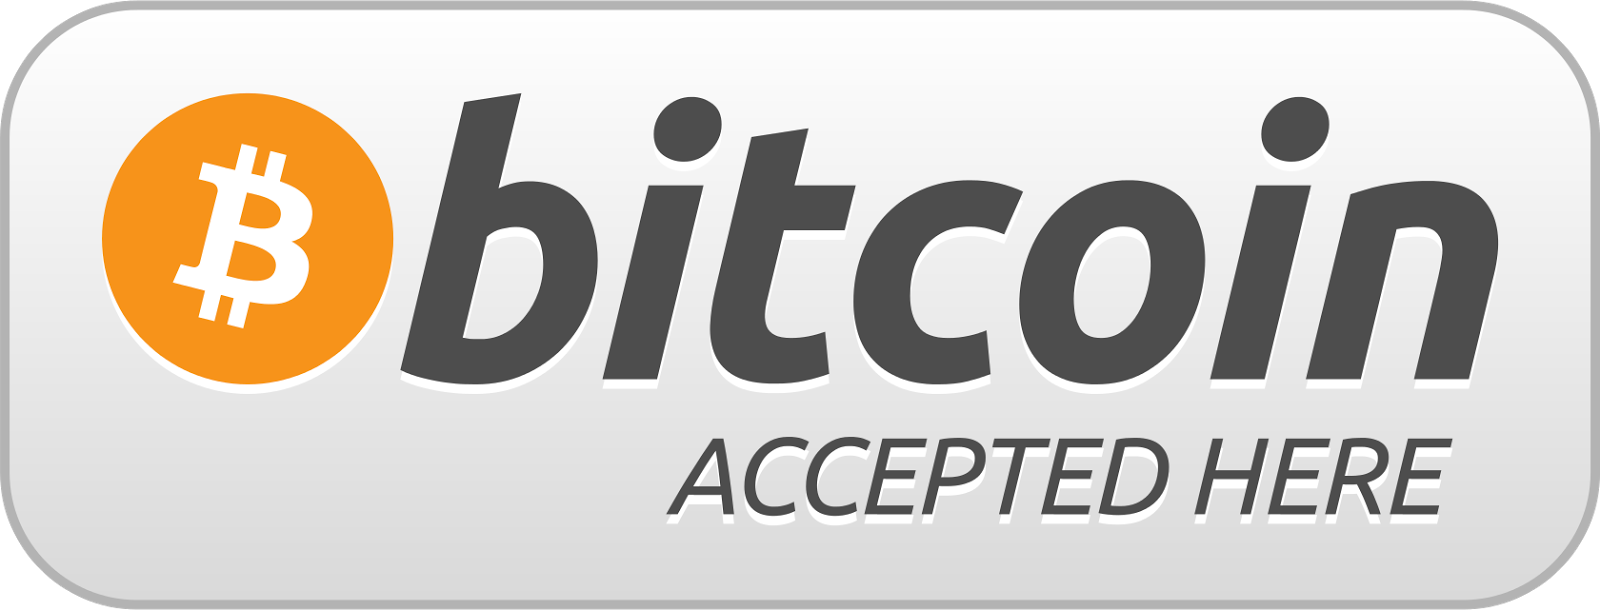 Accepting Bitcoin as payment